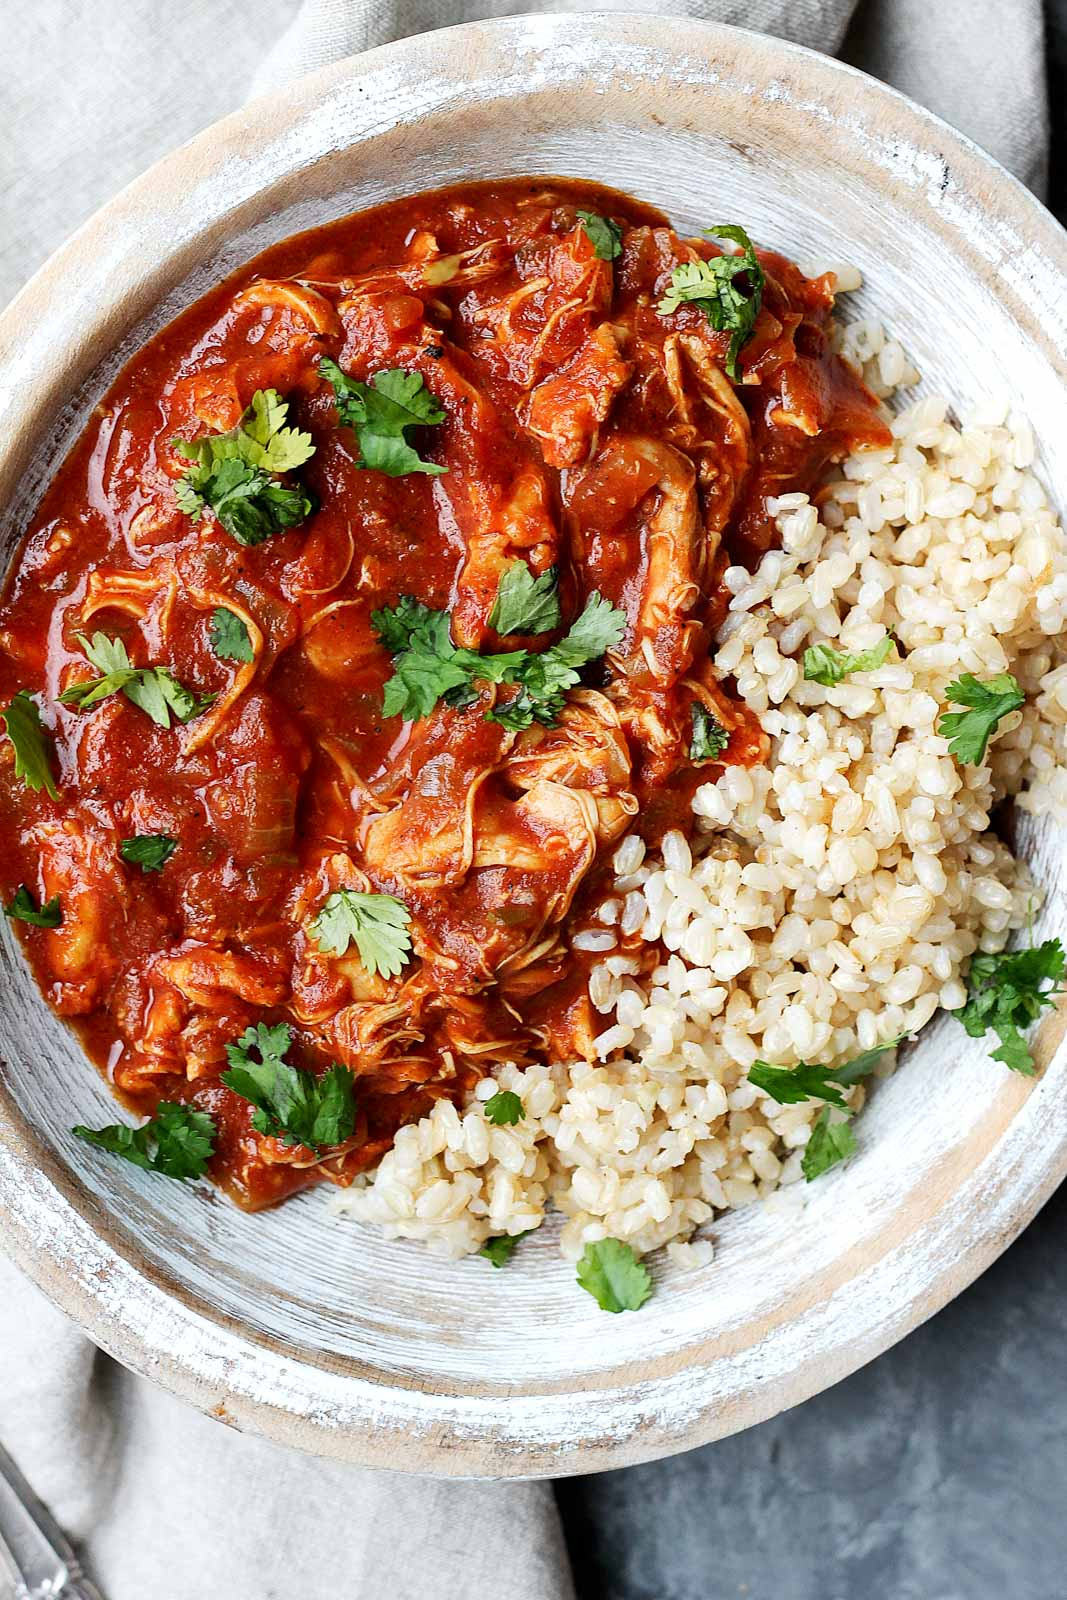 Healthy Slow Cooker Chicken Breast Recipes
 Healthy Slow Cooker Chicken Tikka Masala